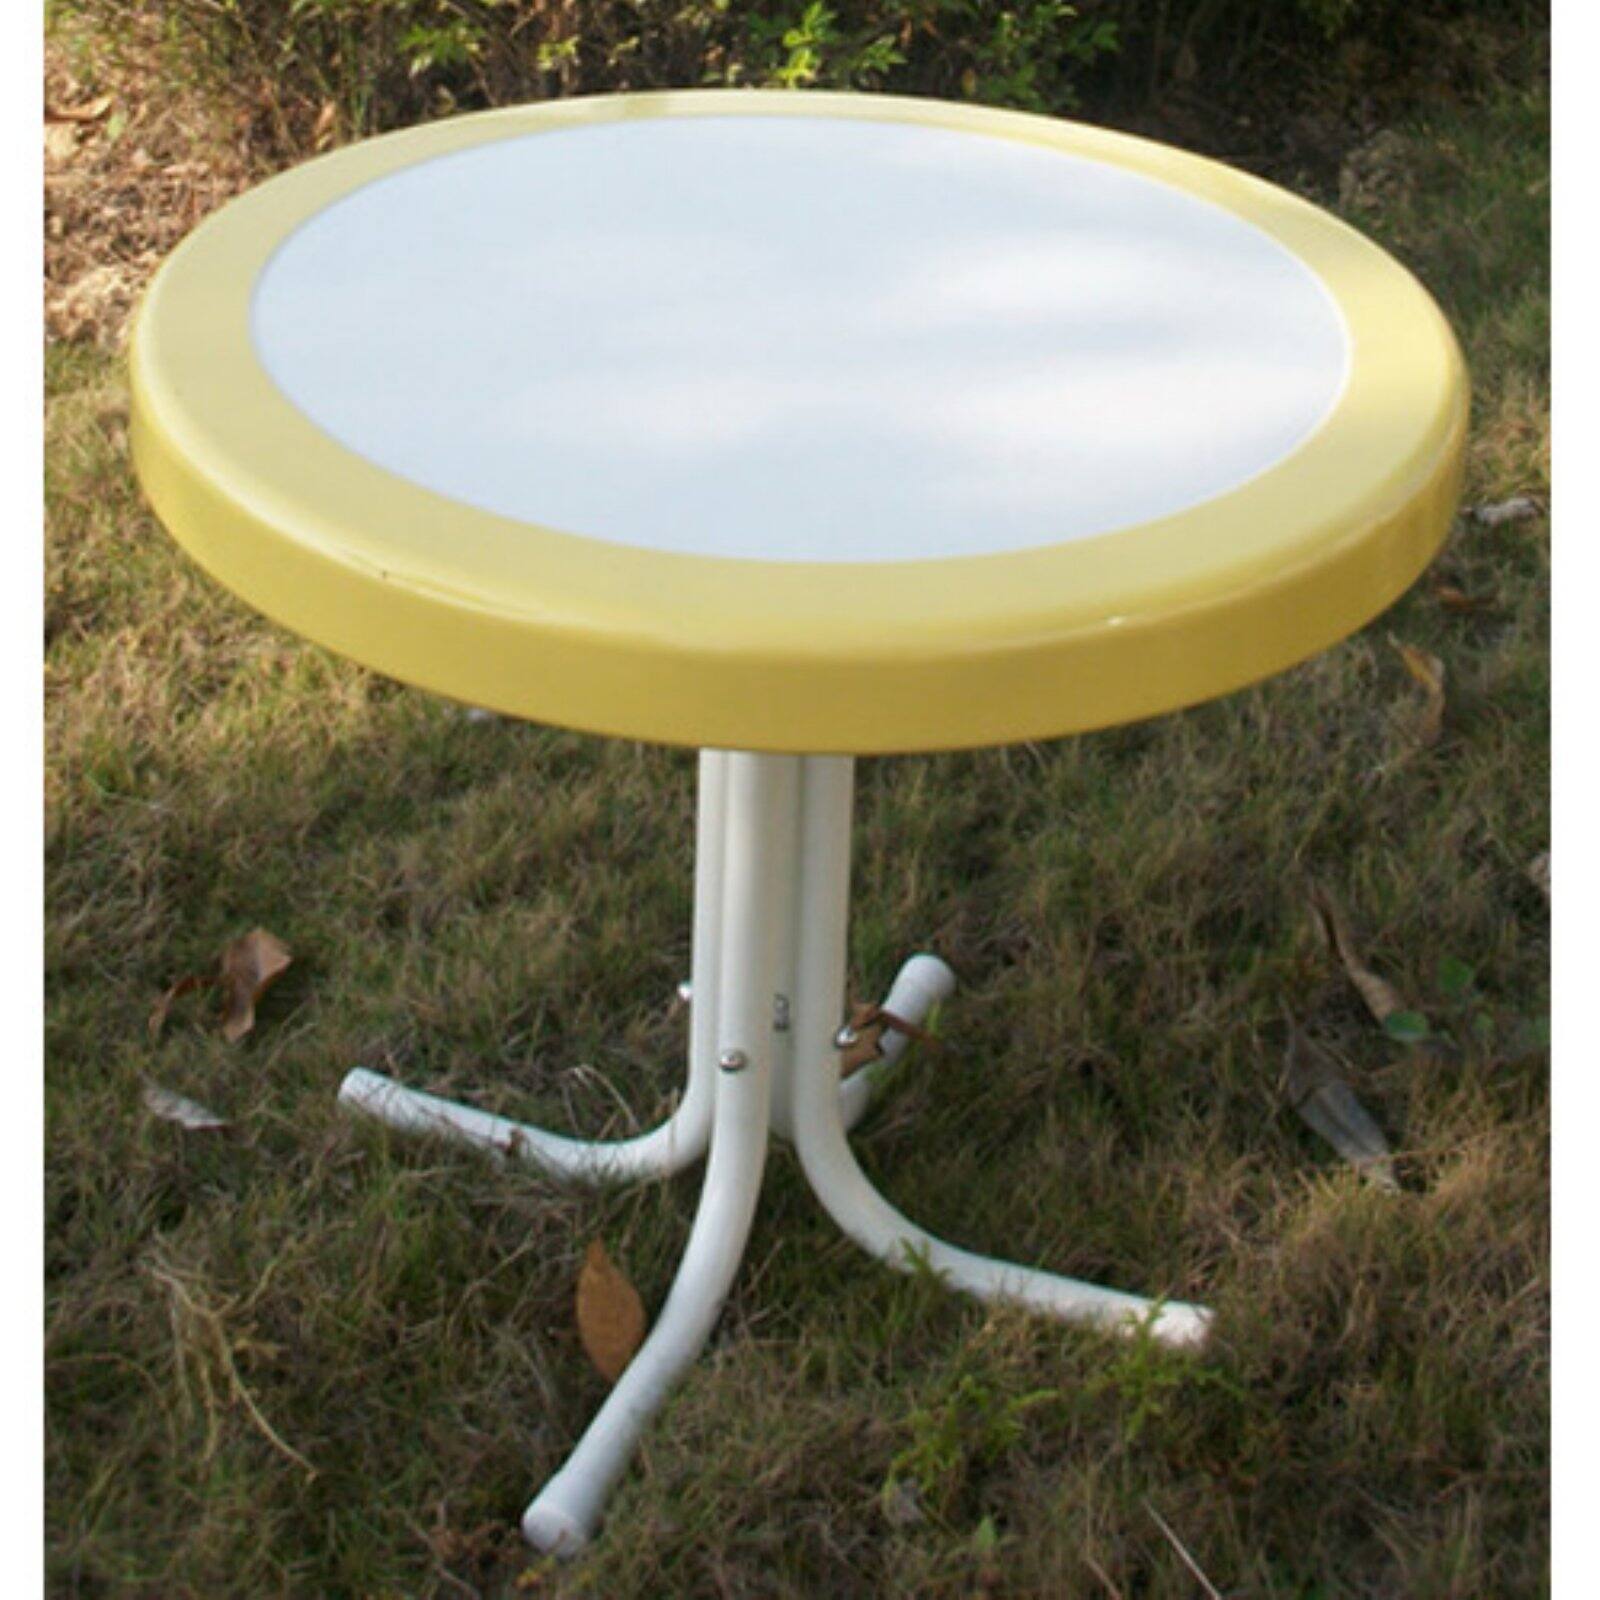 4D Concepts Metal Retro Round Table - image 1 of 2